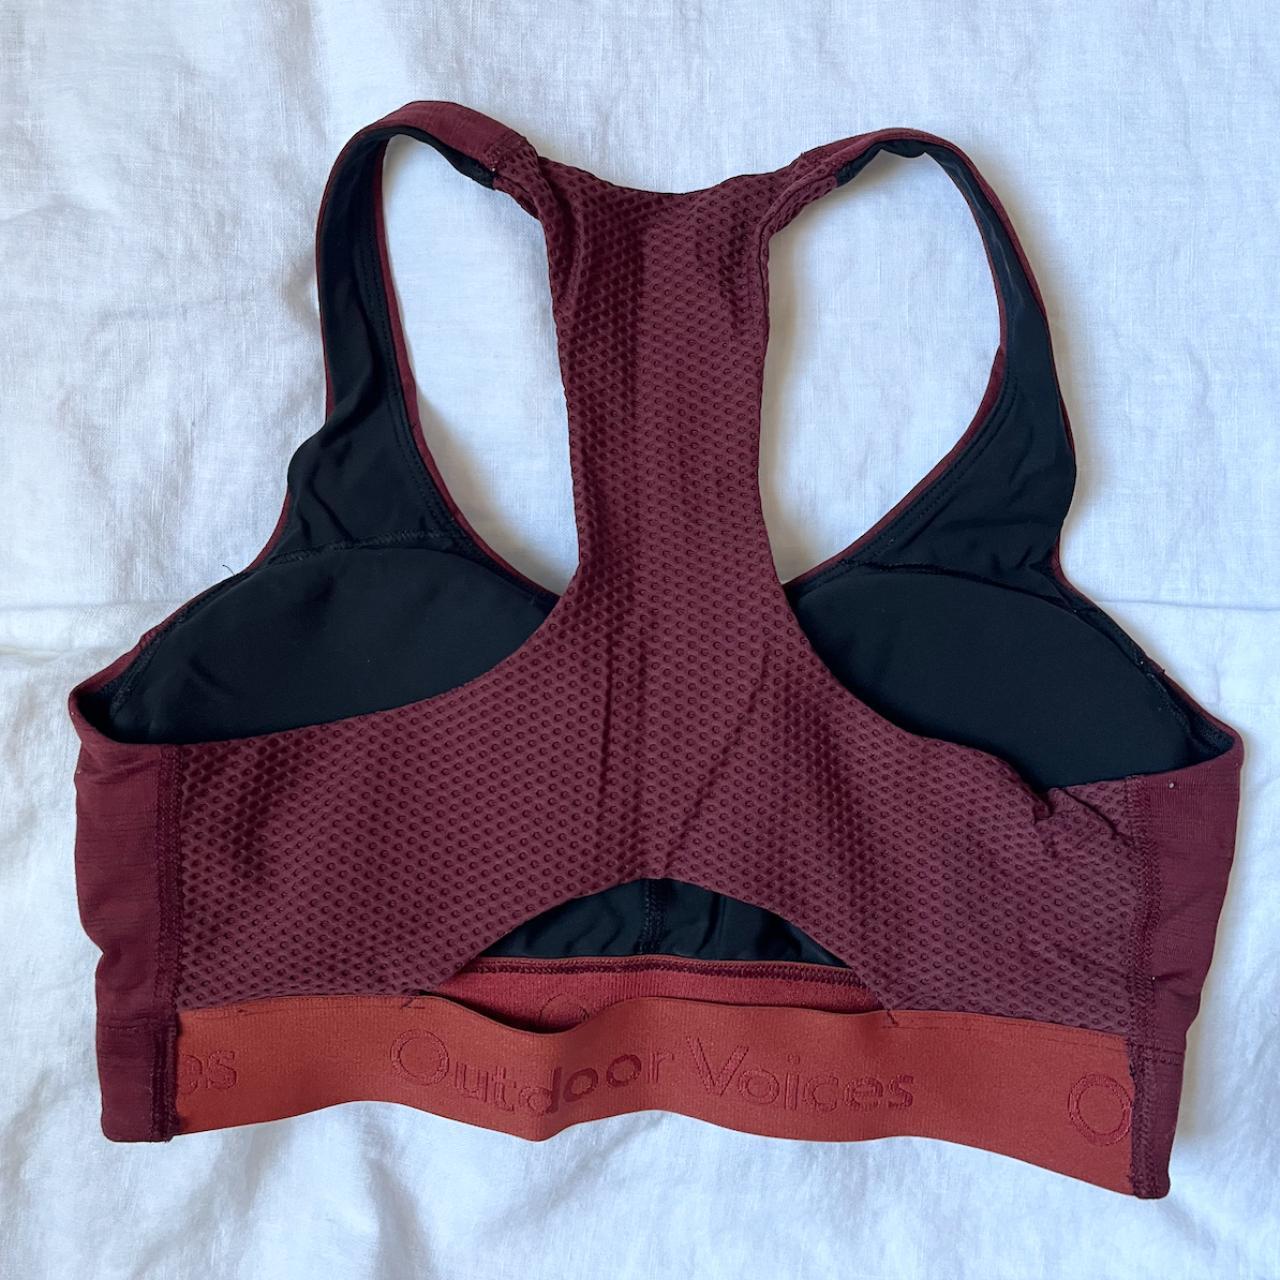 Outdoor Voices Doing Things Bra in a maroon color. - Depop